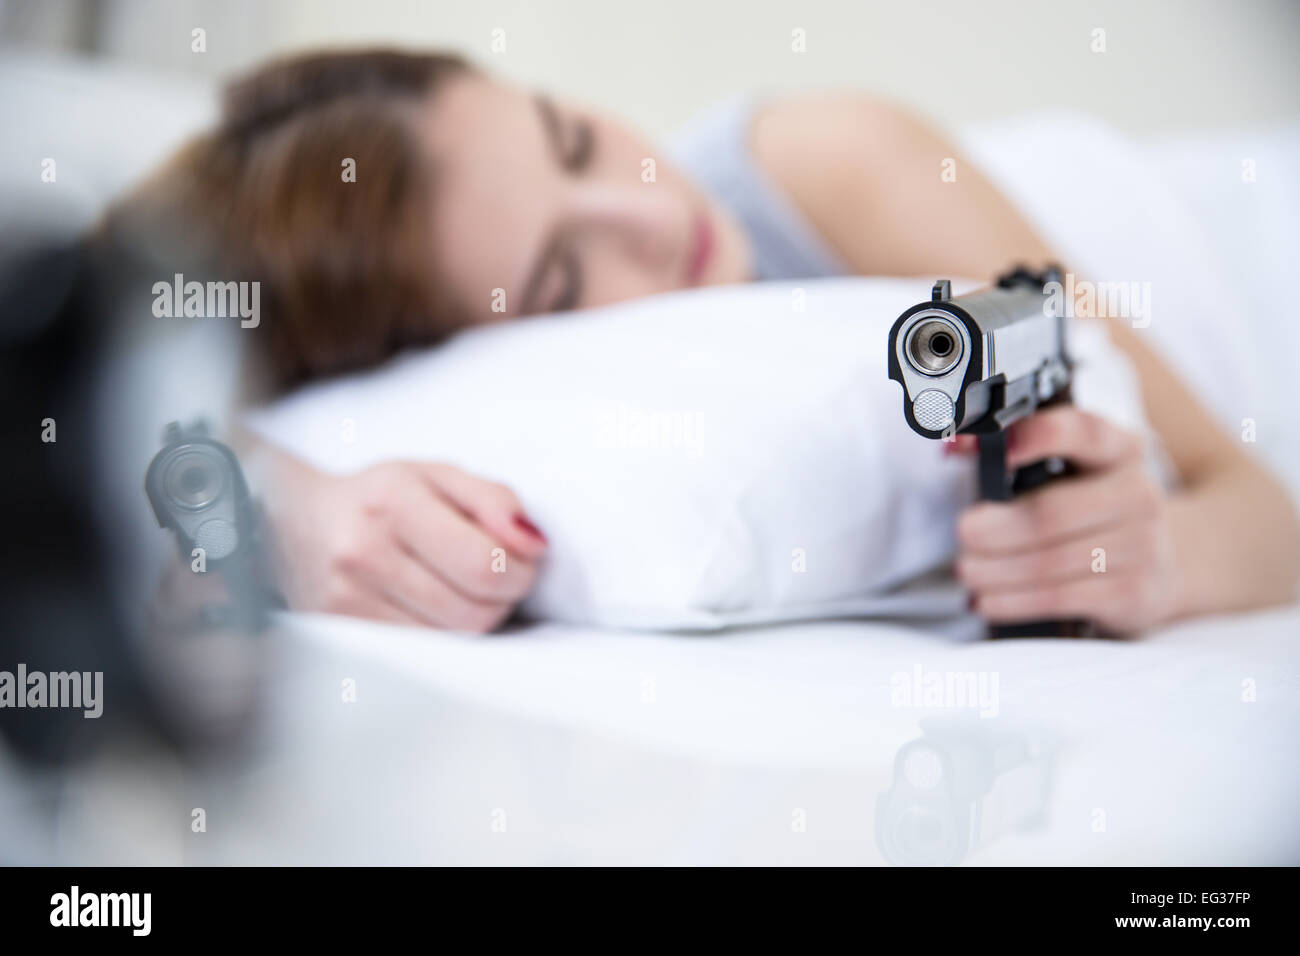 Woman in bed sleeps with hand on gun weapon home security. Focus on gun Stock Photo